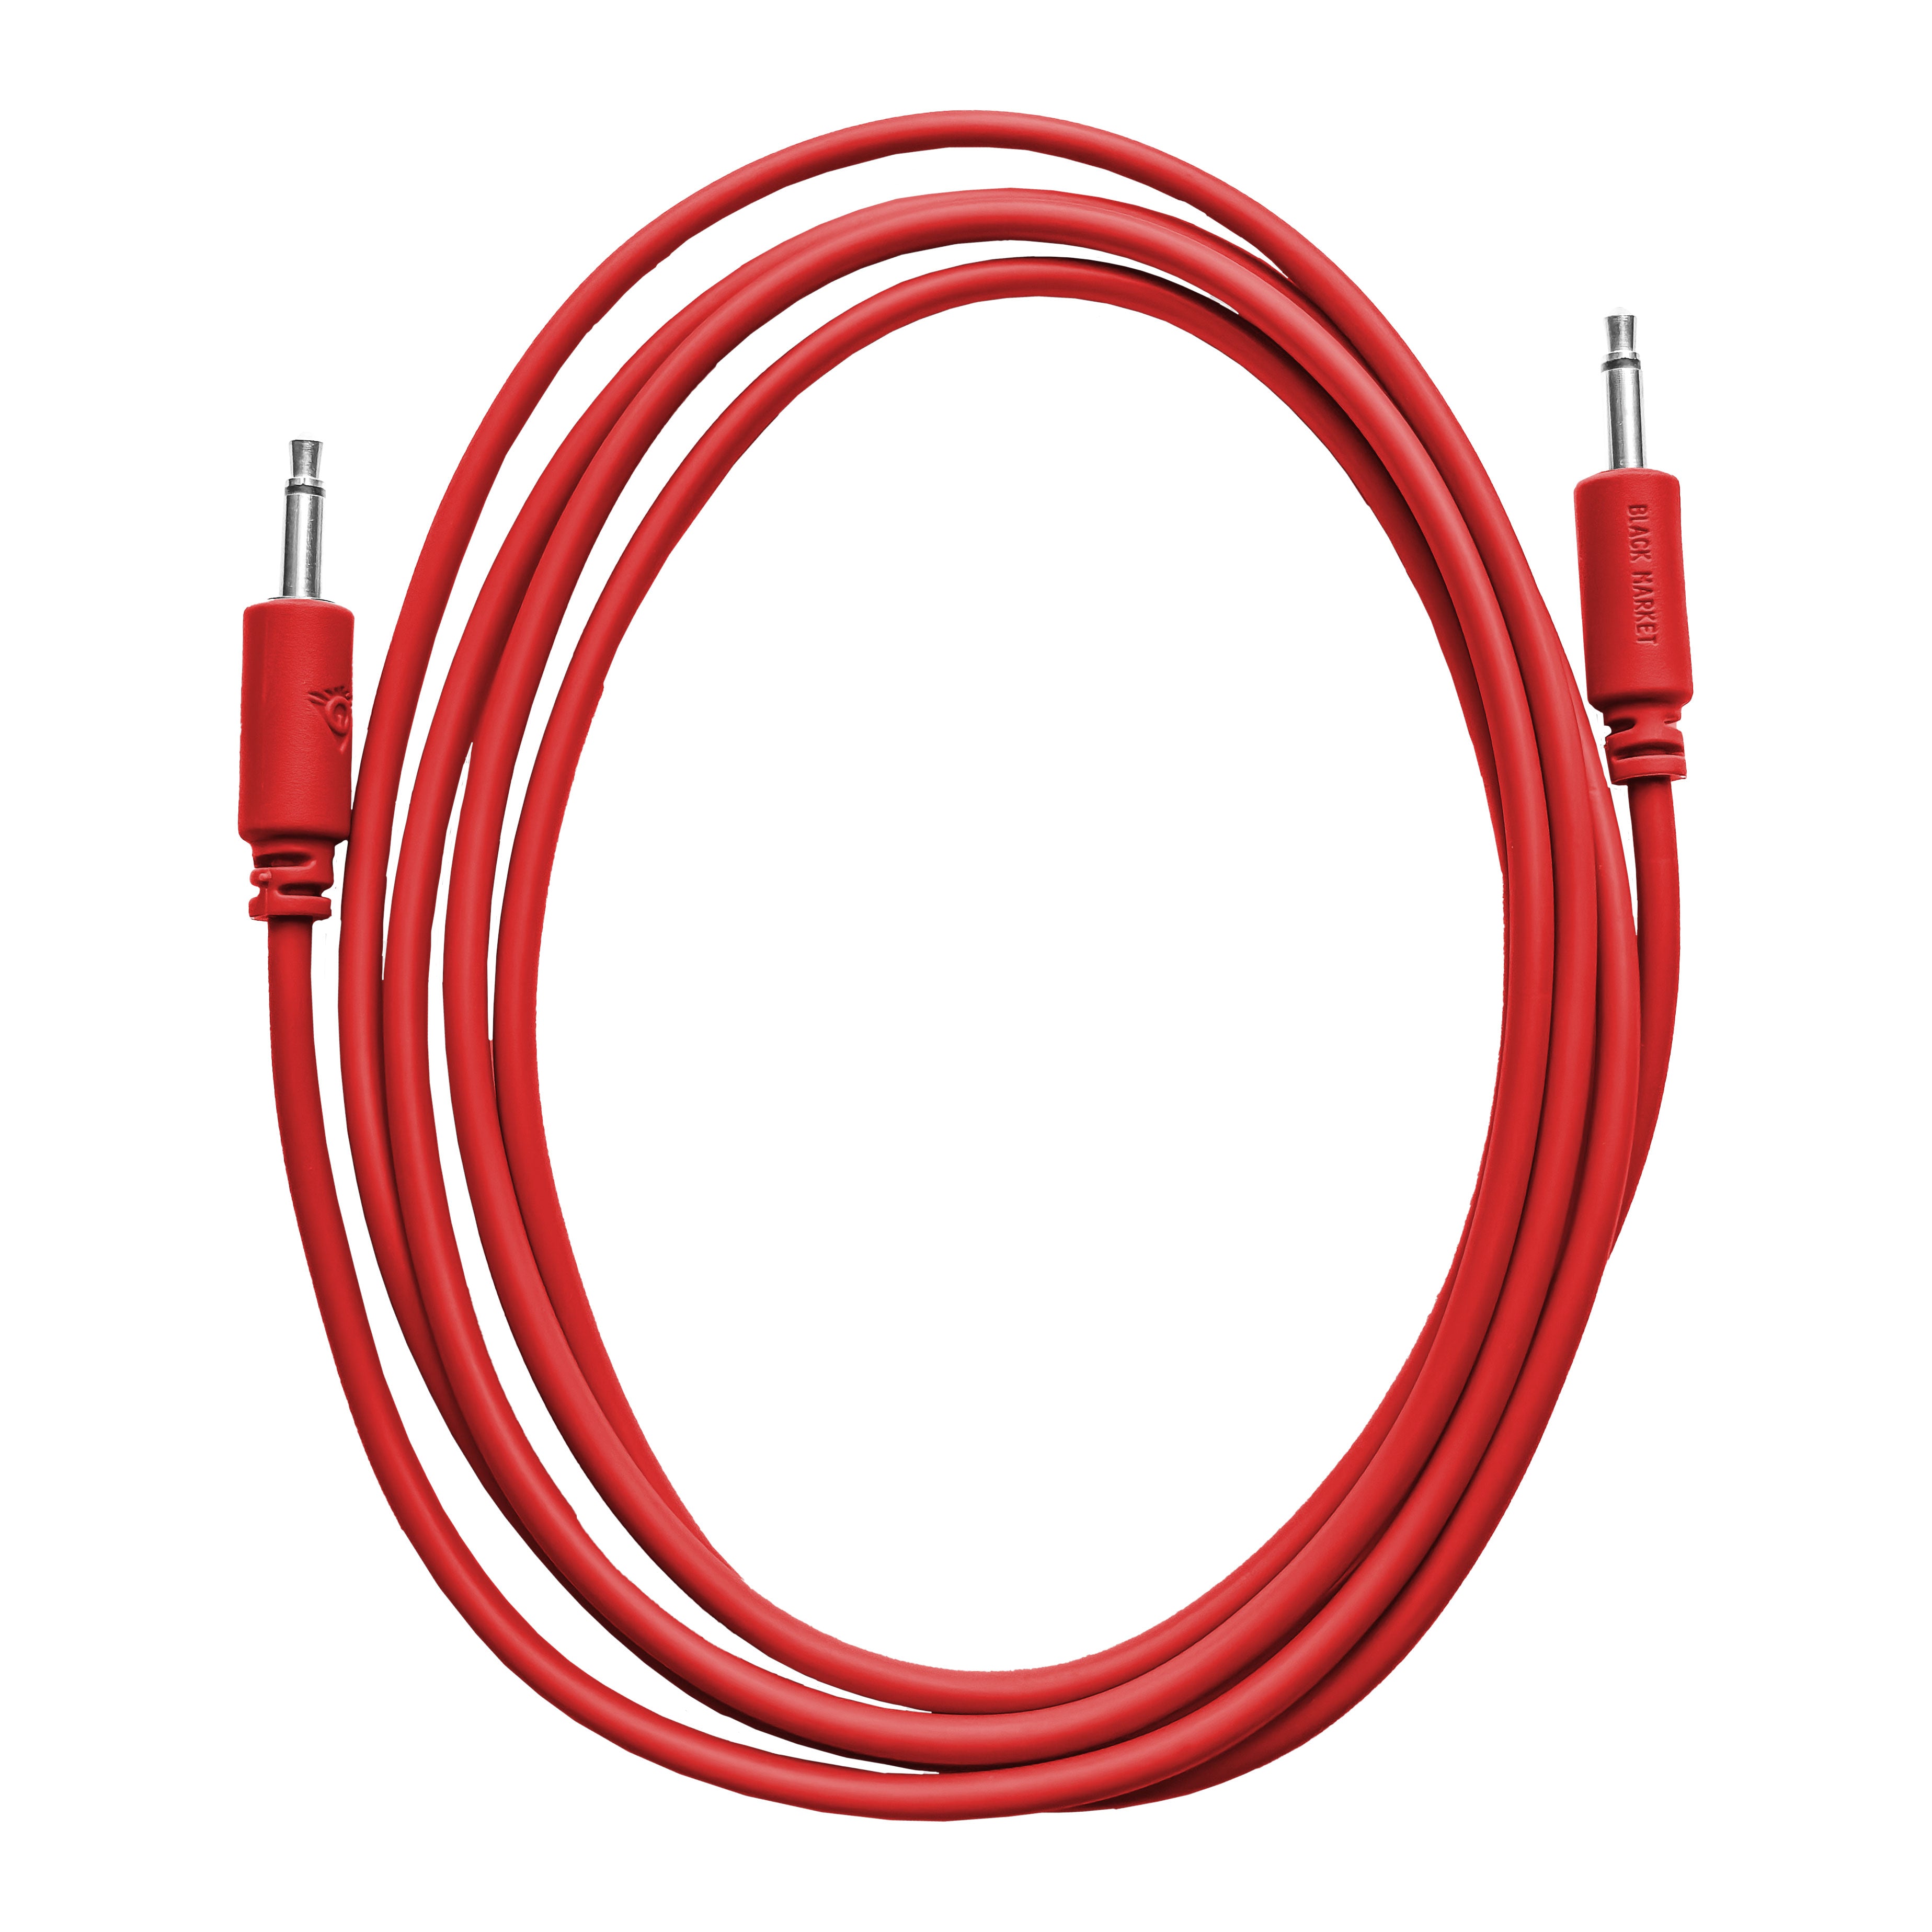 Black Market Modular 3.5mm Patch Cable - 100cm/40" - Red View 1